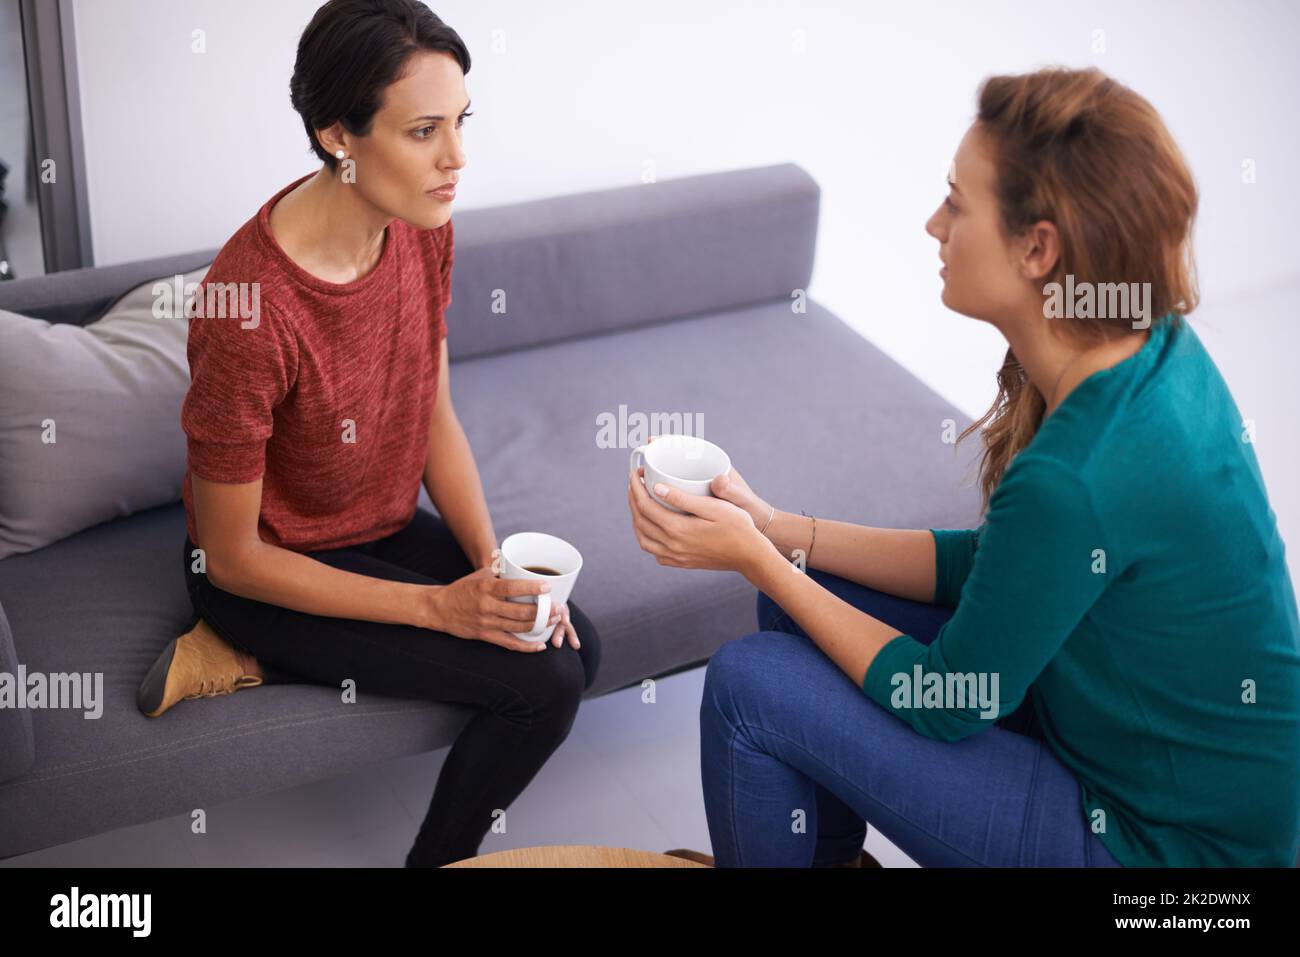 Quick coffee discussion. Shot of two female professionals having a discussion in an informal office setting. Stock Photo